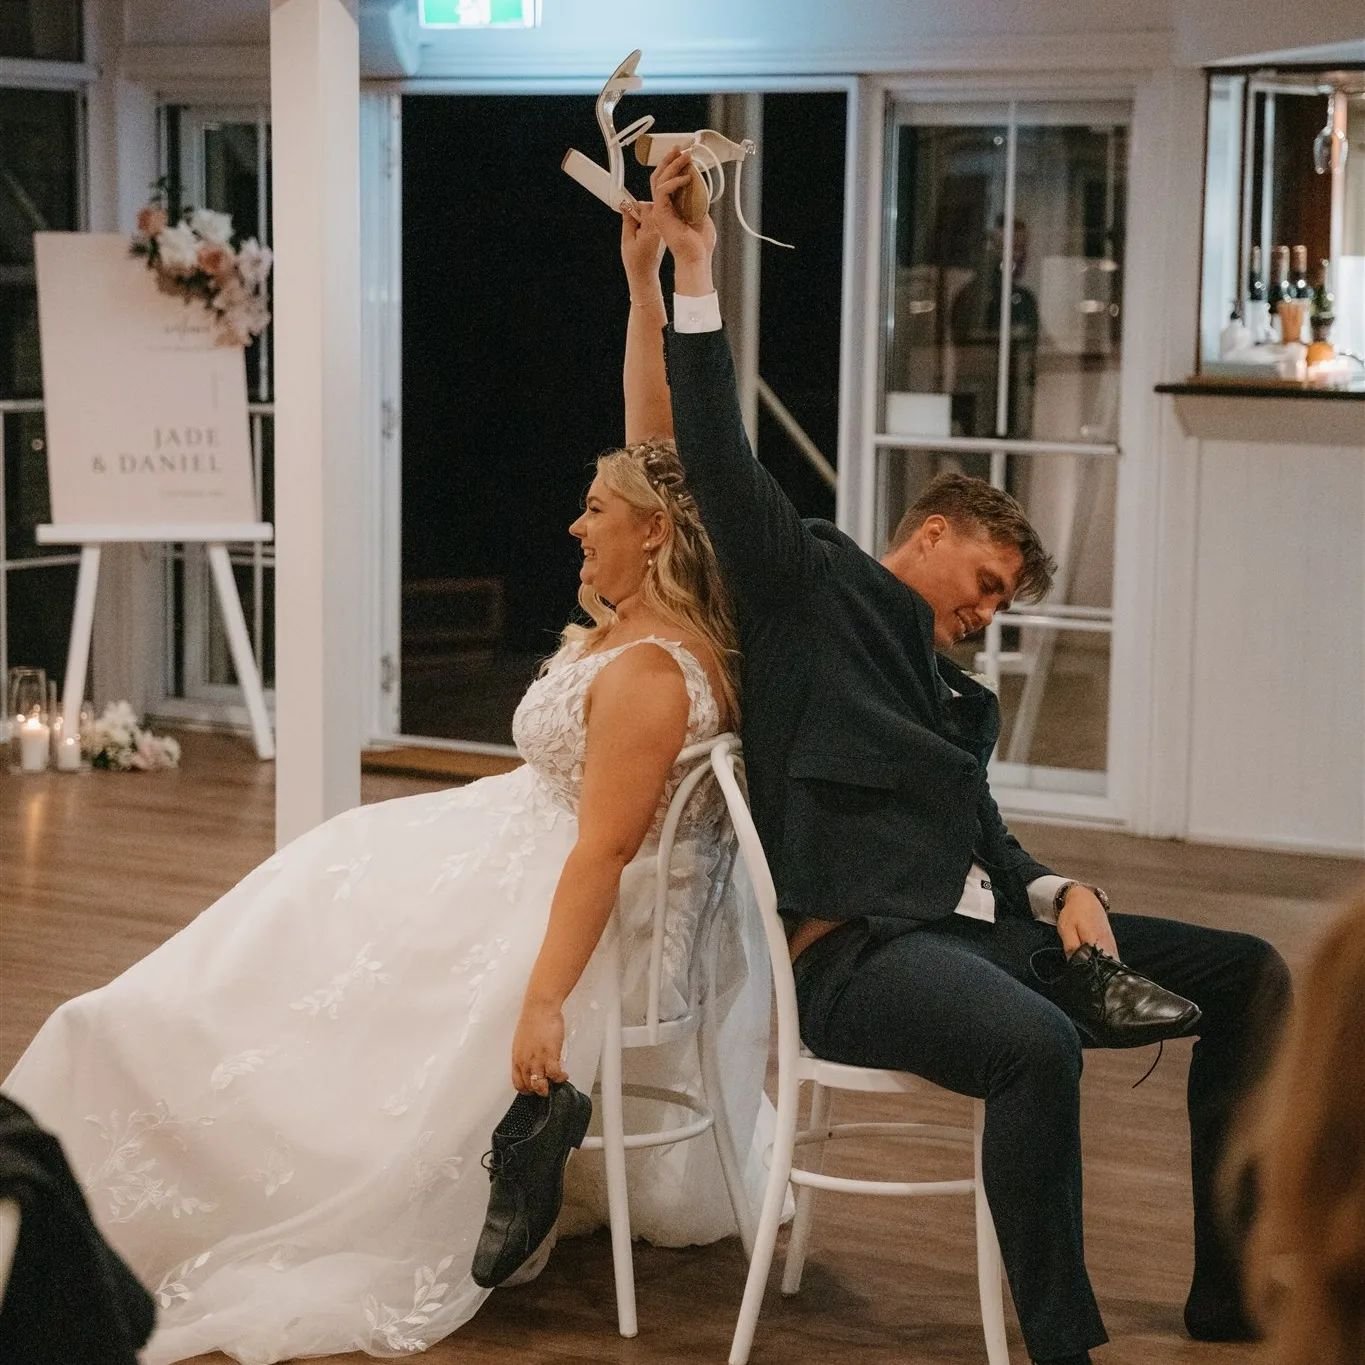 Inject a whole lotta fun into your wedding reception with a super easy wedding game!

This is the Shoe Game, where you battle it out to see how aligned you are when I ask you a series of  cheeky questions.

Your guests get involved by cheering with a